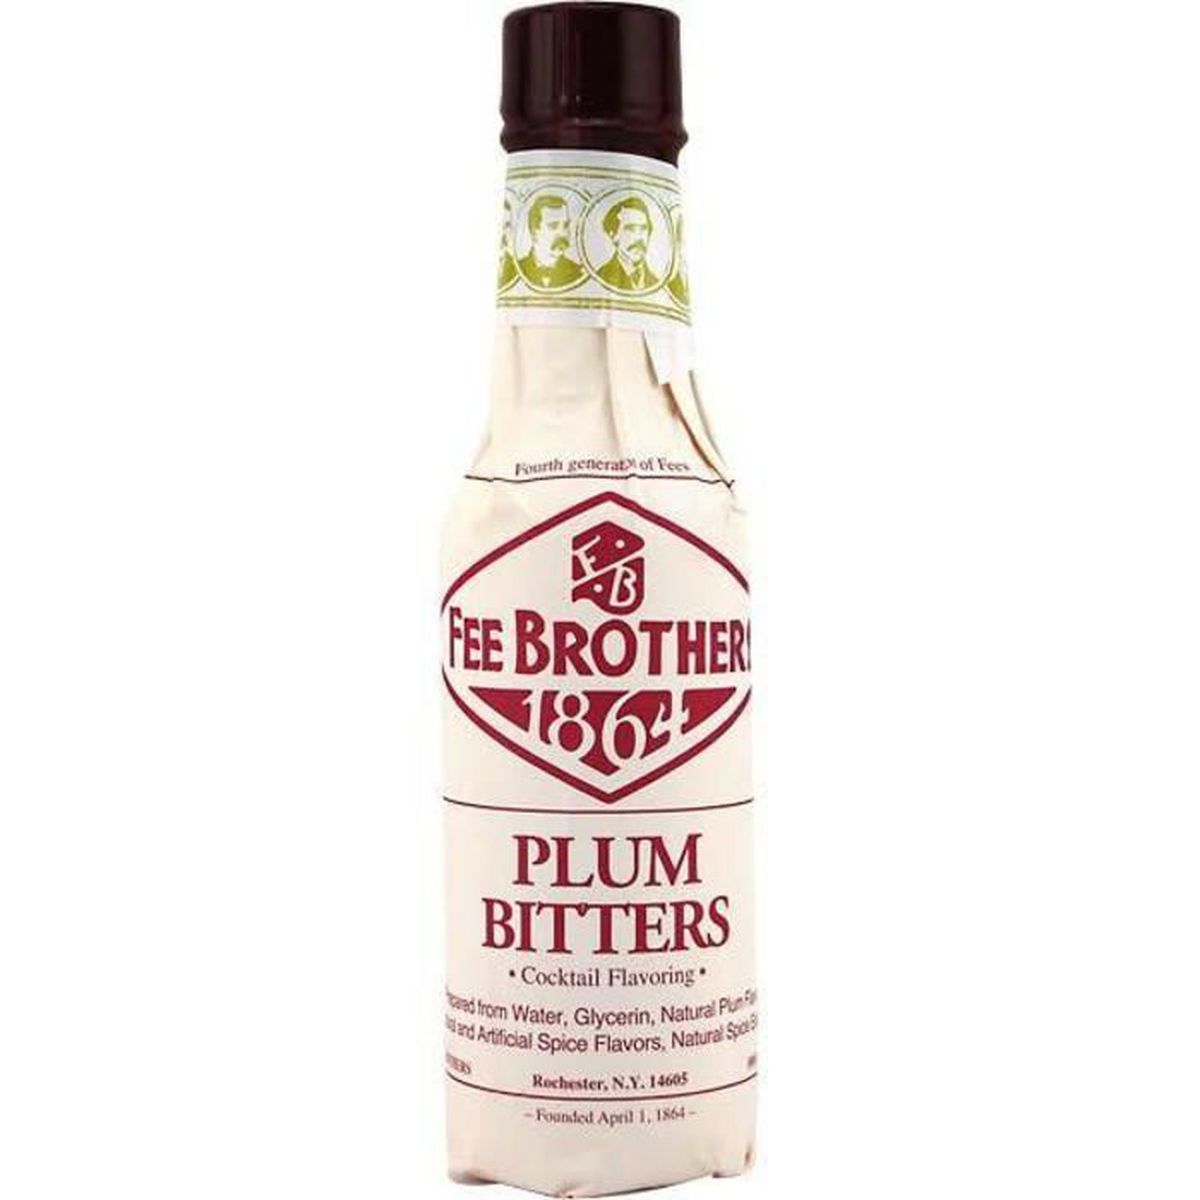 A bottle of bitters in a white and maroon label